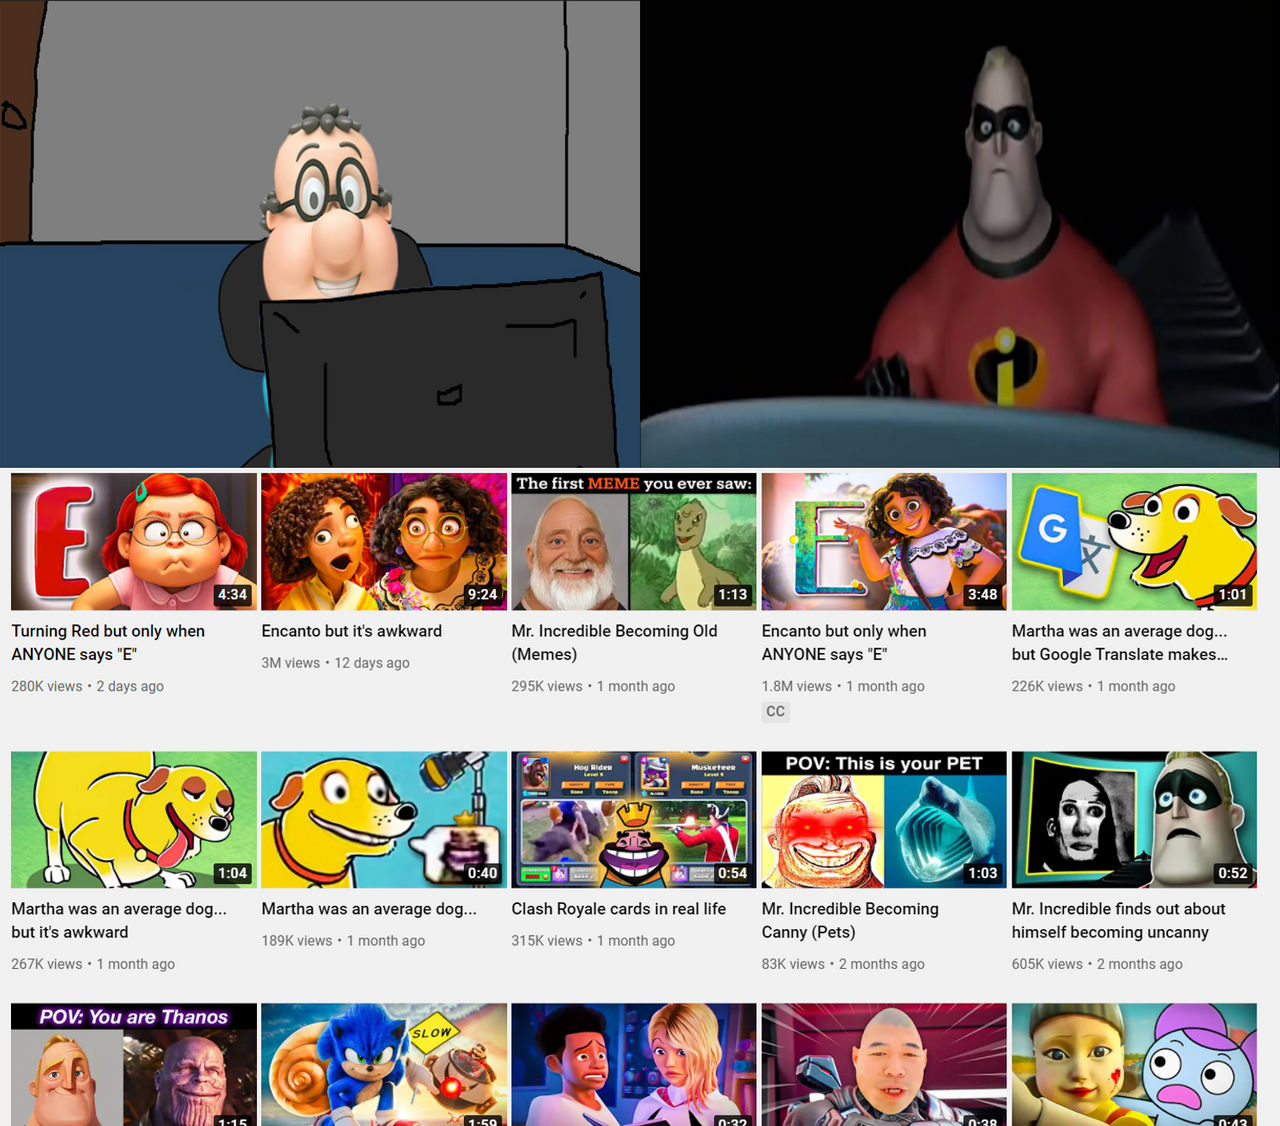 Reddit: *hates Mr Incredible becoming memes* rs: them* creates more  versions of them* won't let me live Yau wan't let me die. - iFunny